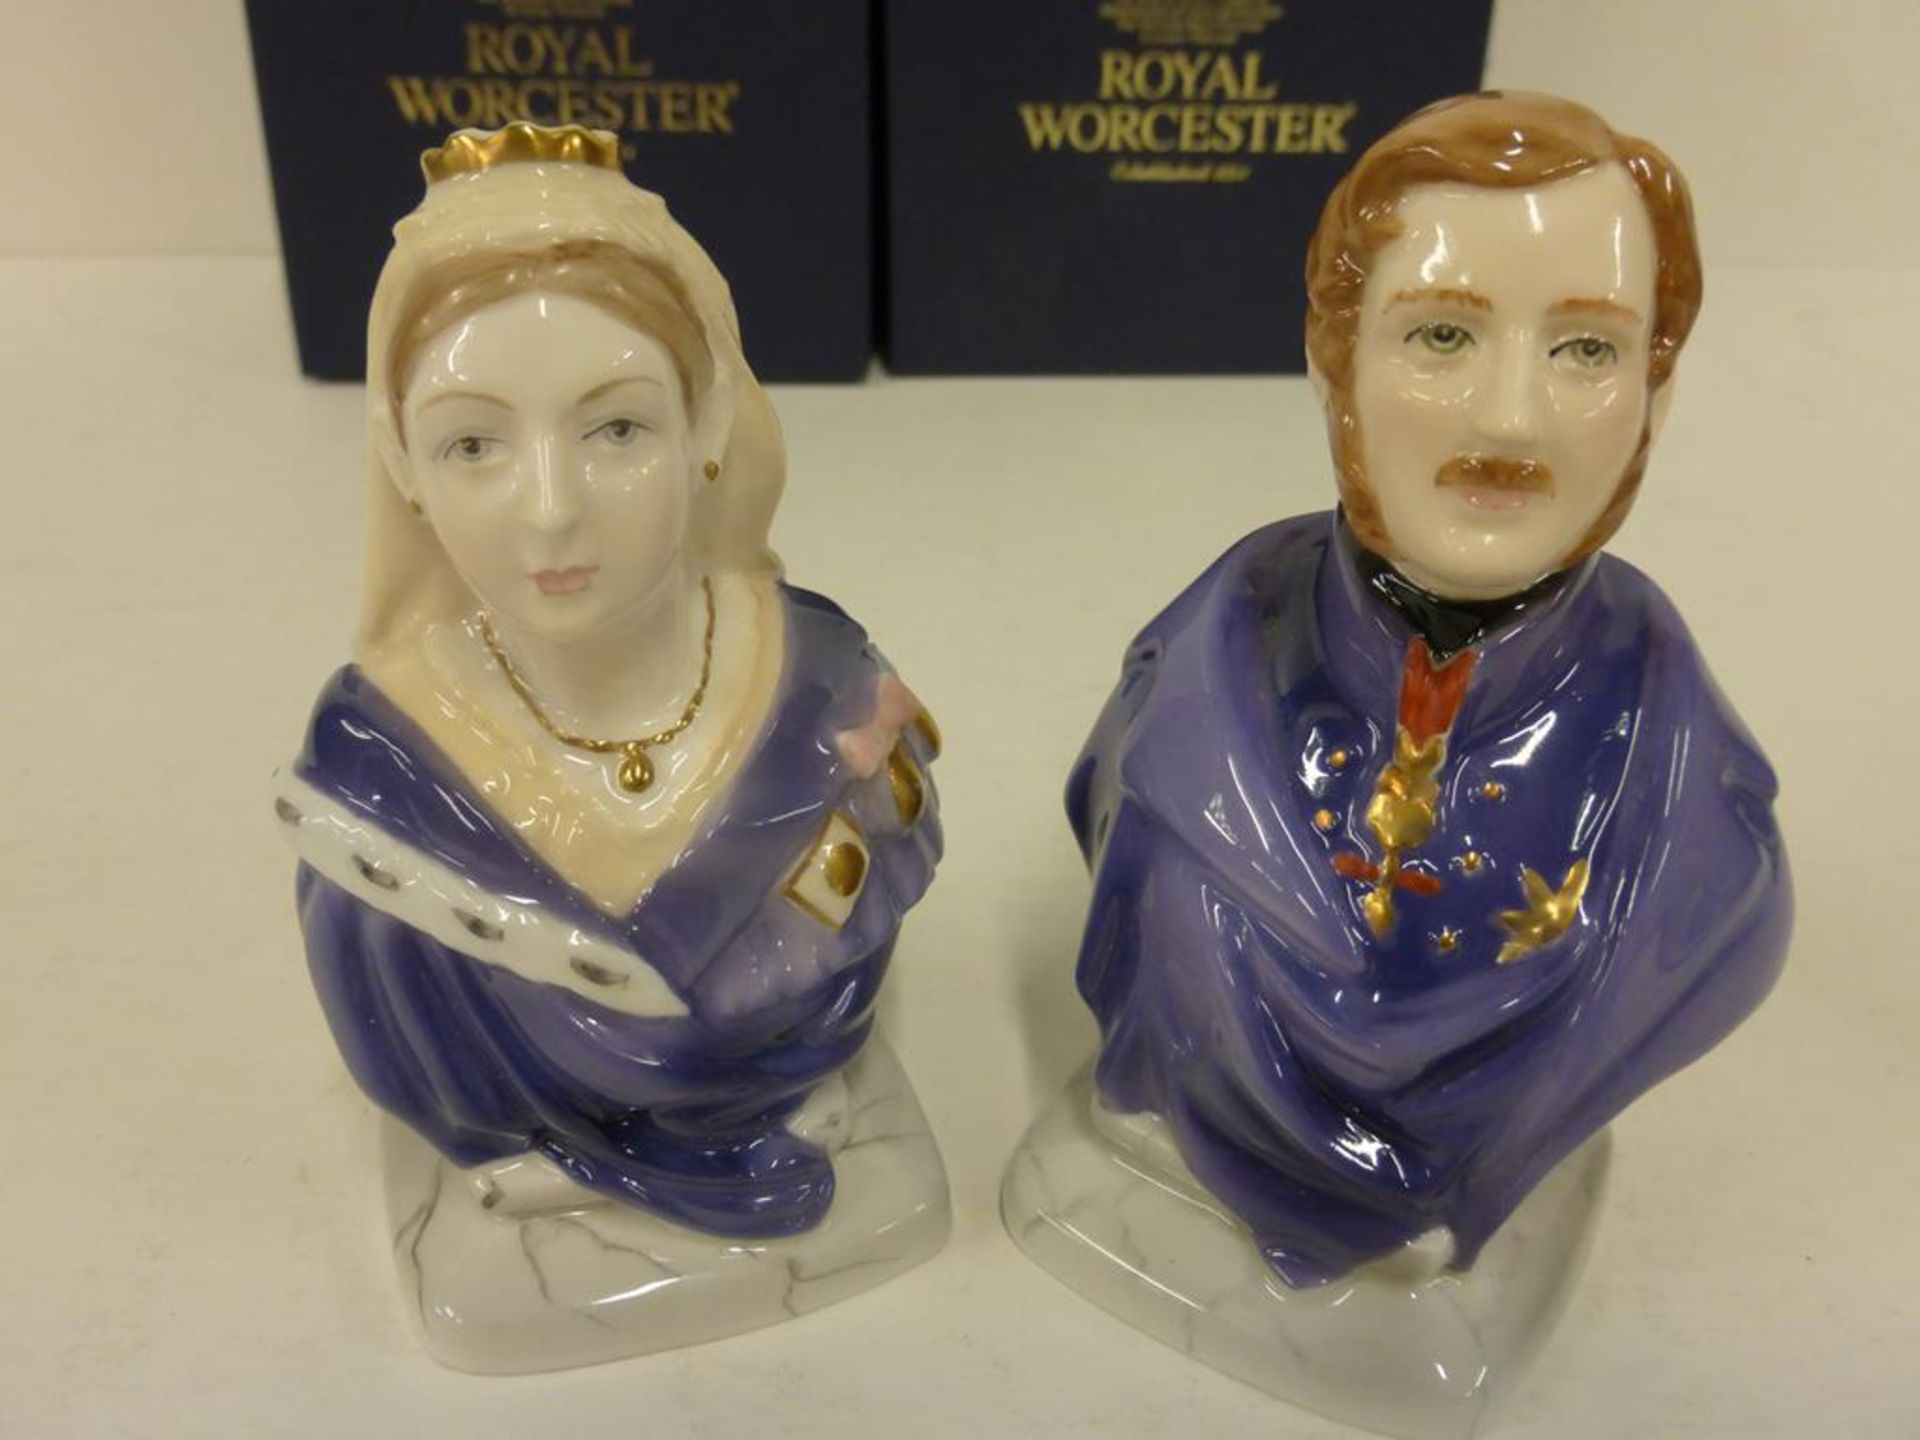 Two Royal Worcester Candle Snuffers - Queen Victoria and Prince Albert. Limited Edition of 500. - Image 4 of 8